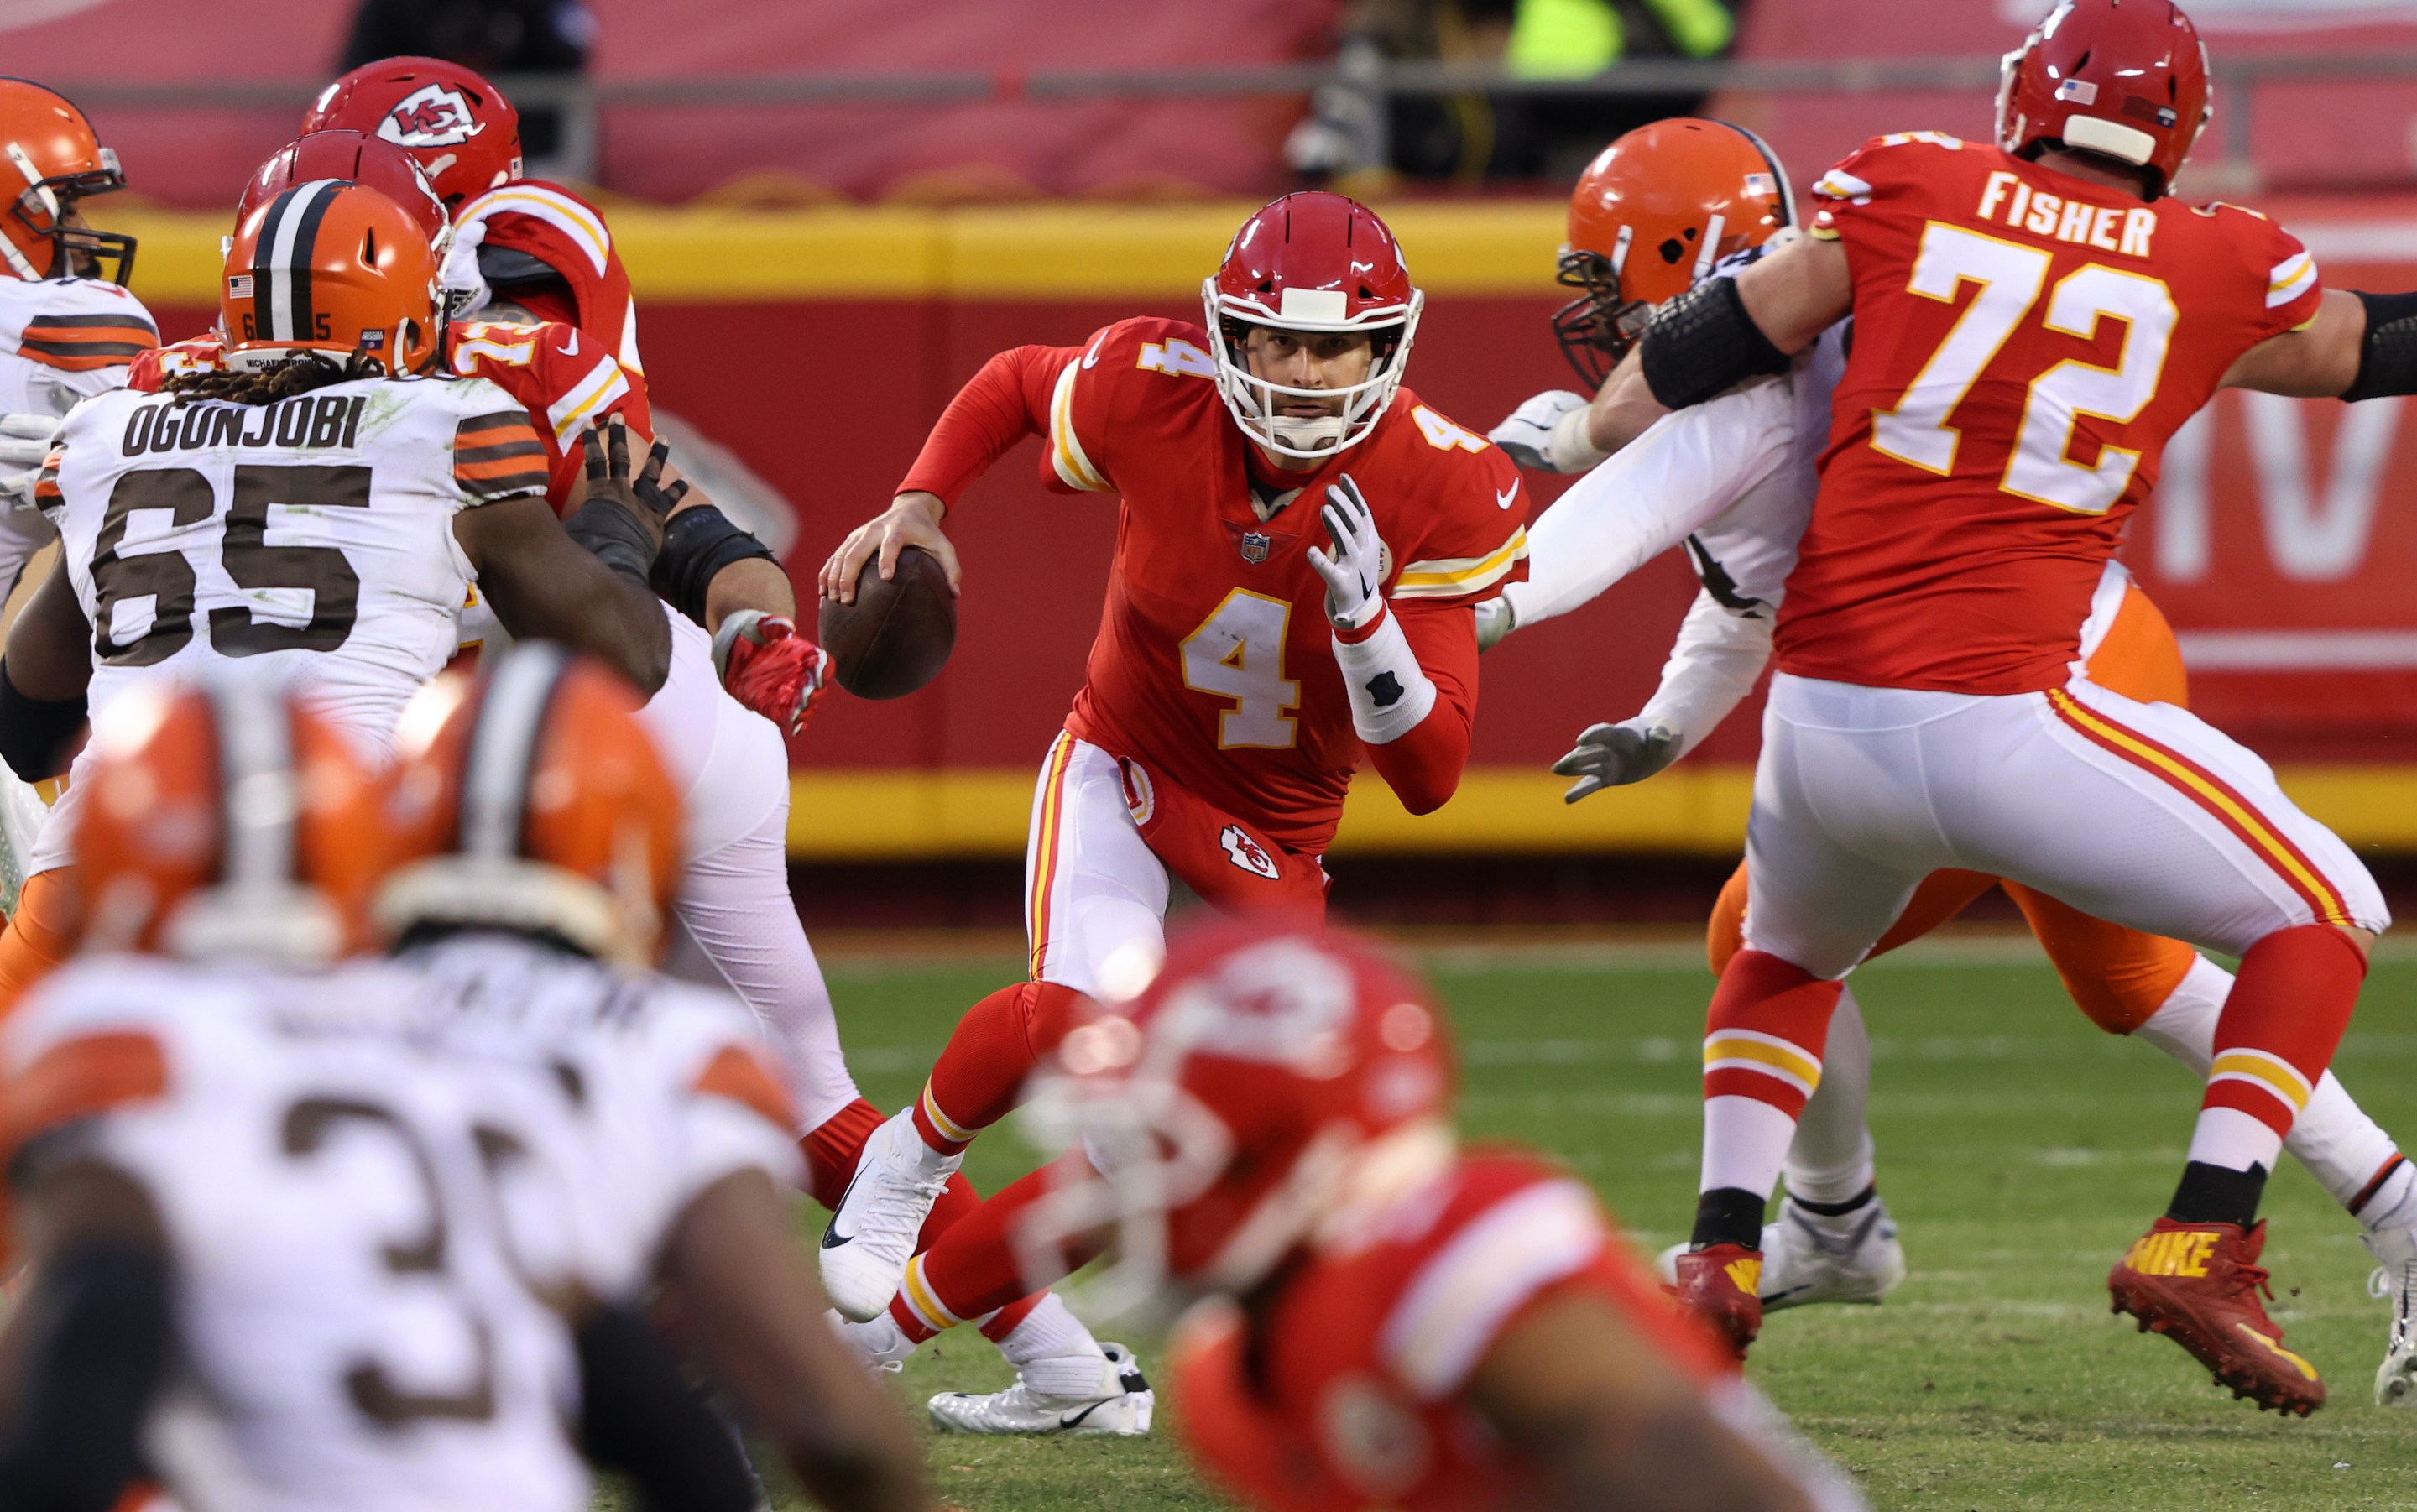 Quarterback Chad Henne #4 of the Kansas City Chiefs scrambles against the defense of the Cleveland Browns late in the fourth quarter of the AFC Divisional Playoff game at Arrowhead Stadium on January 17, 2021 in Kansas City, Missouri.